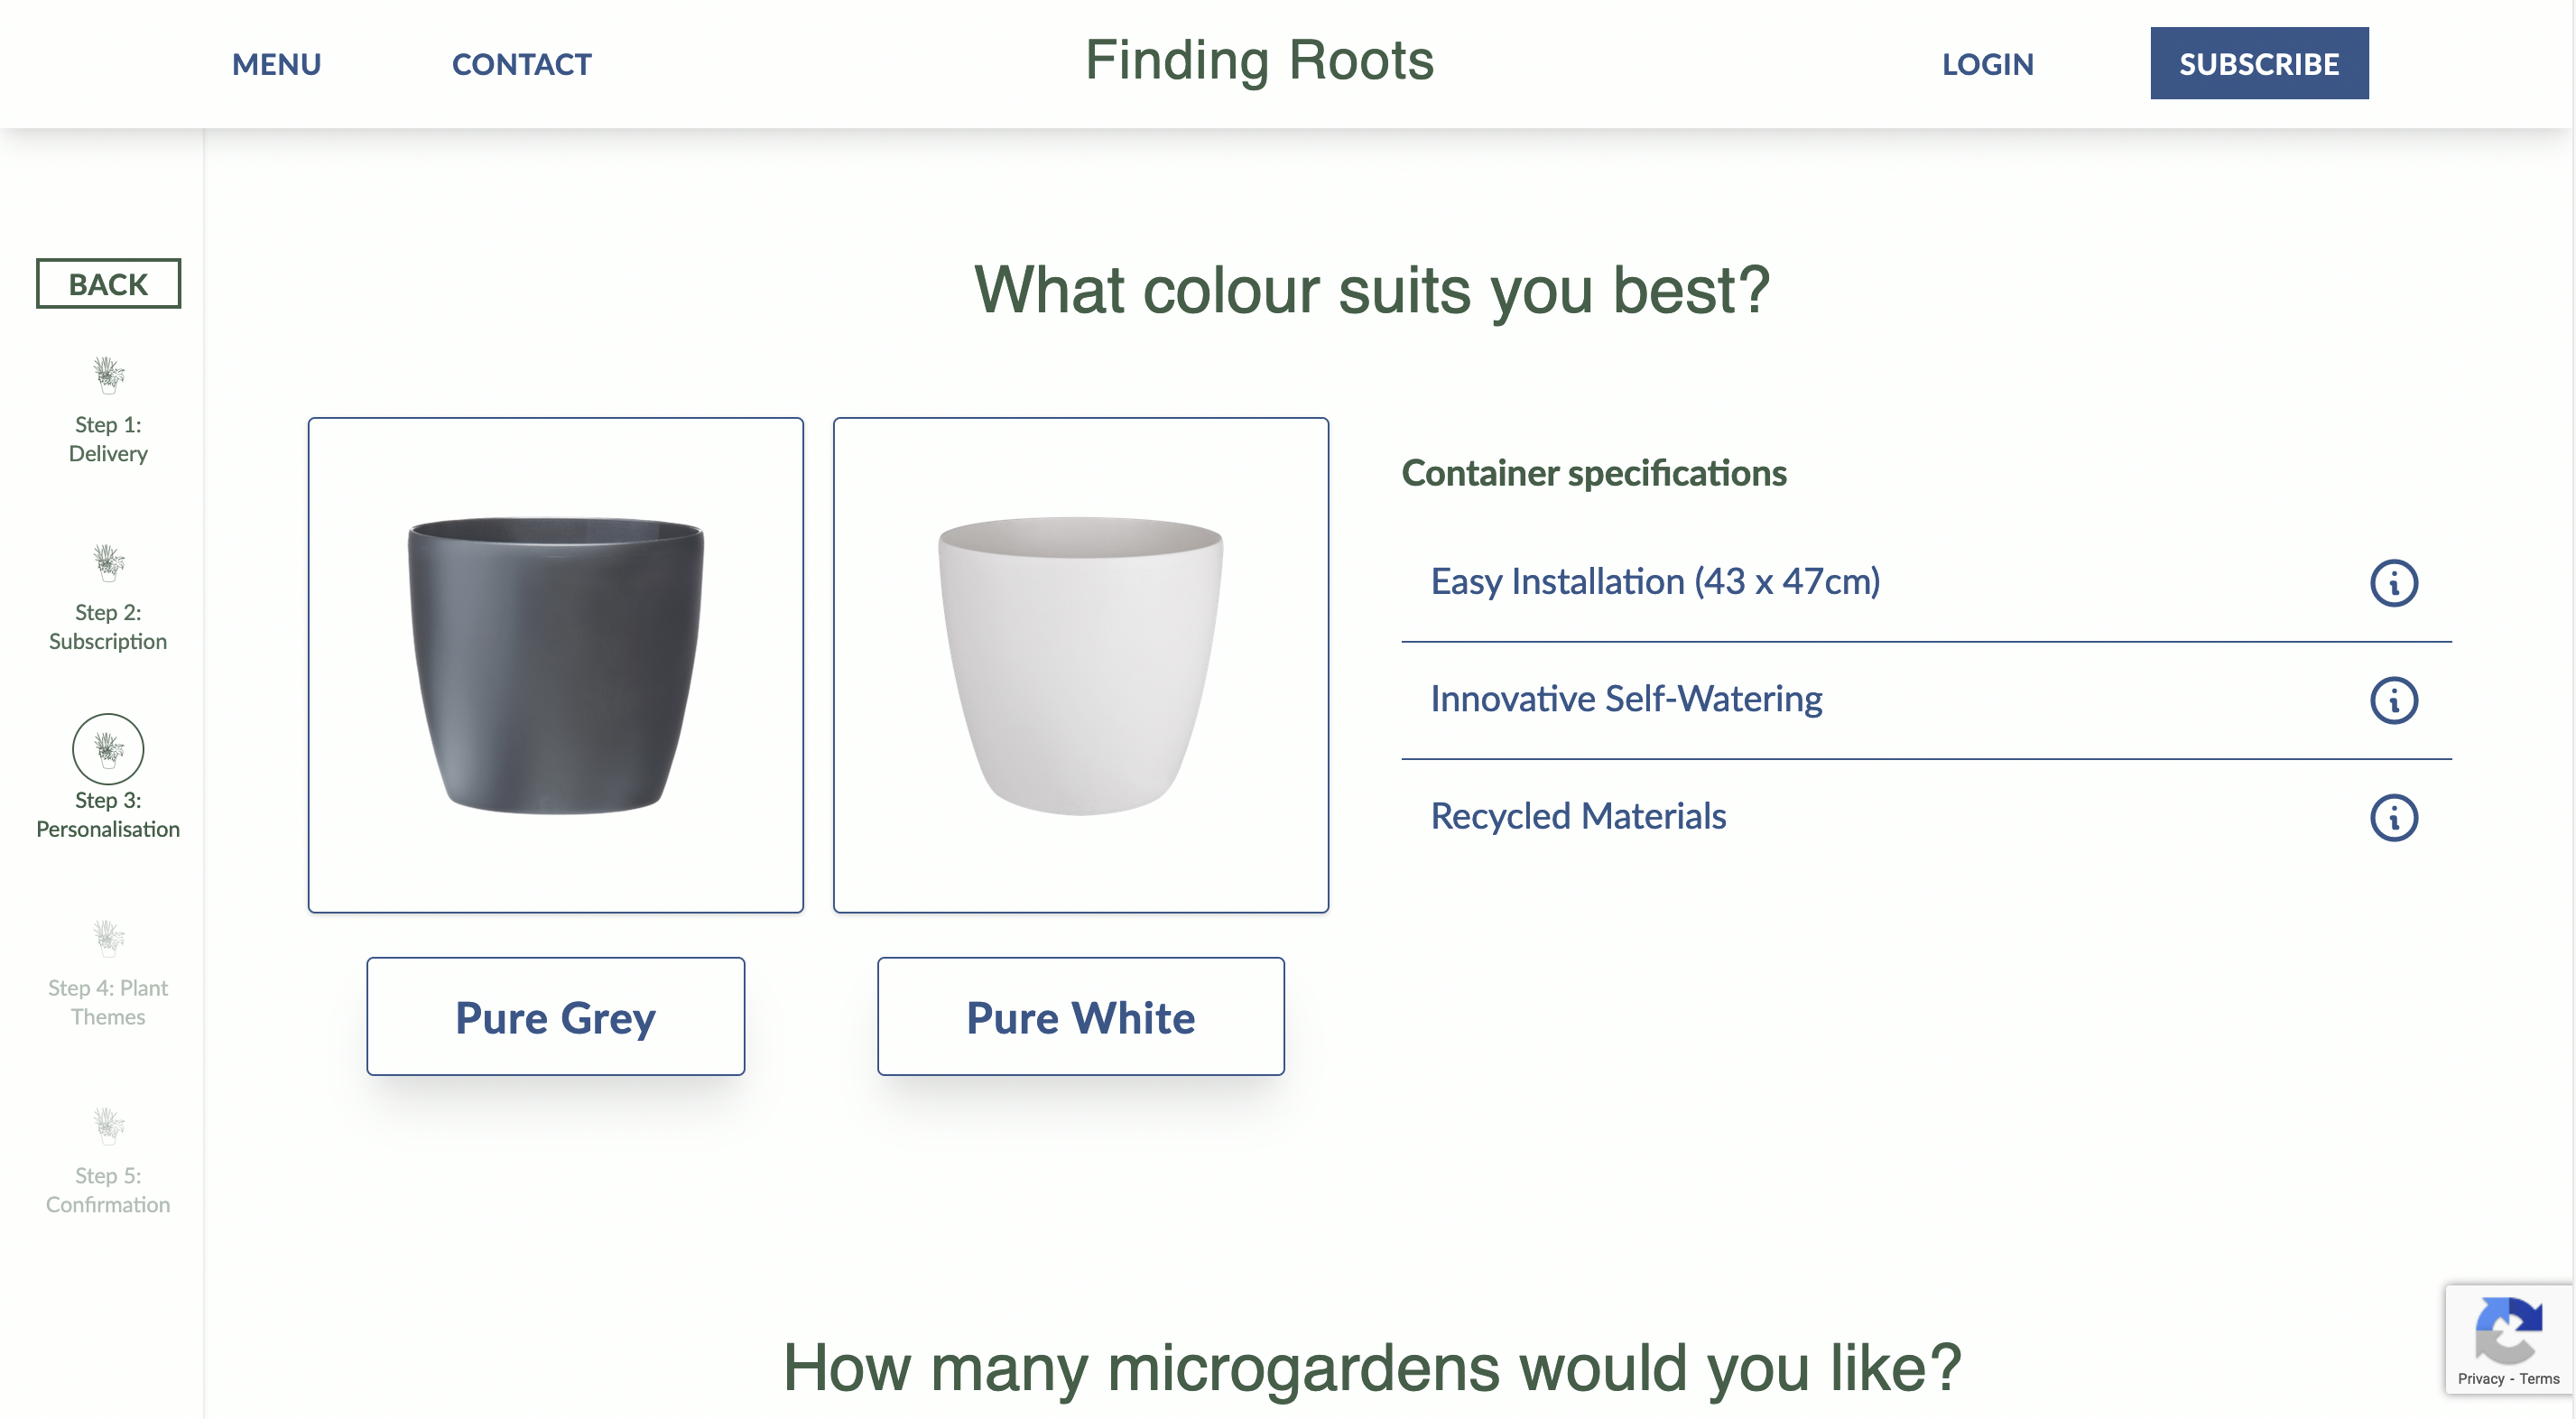 Screenshot of the concept of checkout for Finding Roots